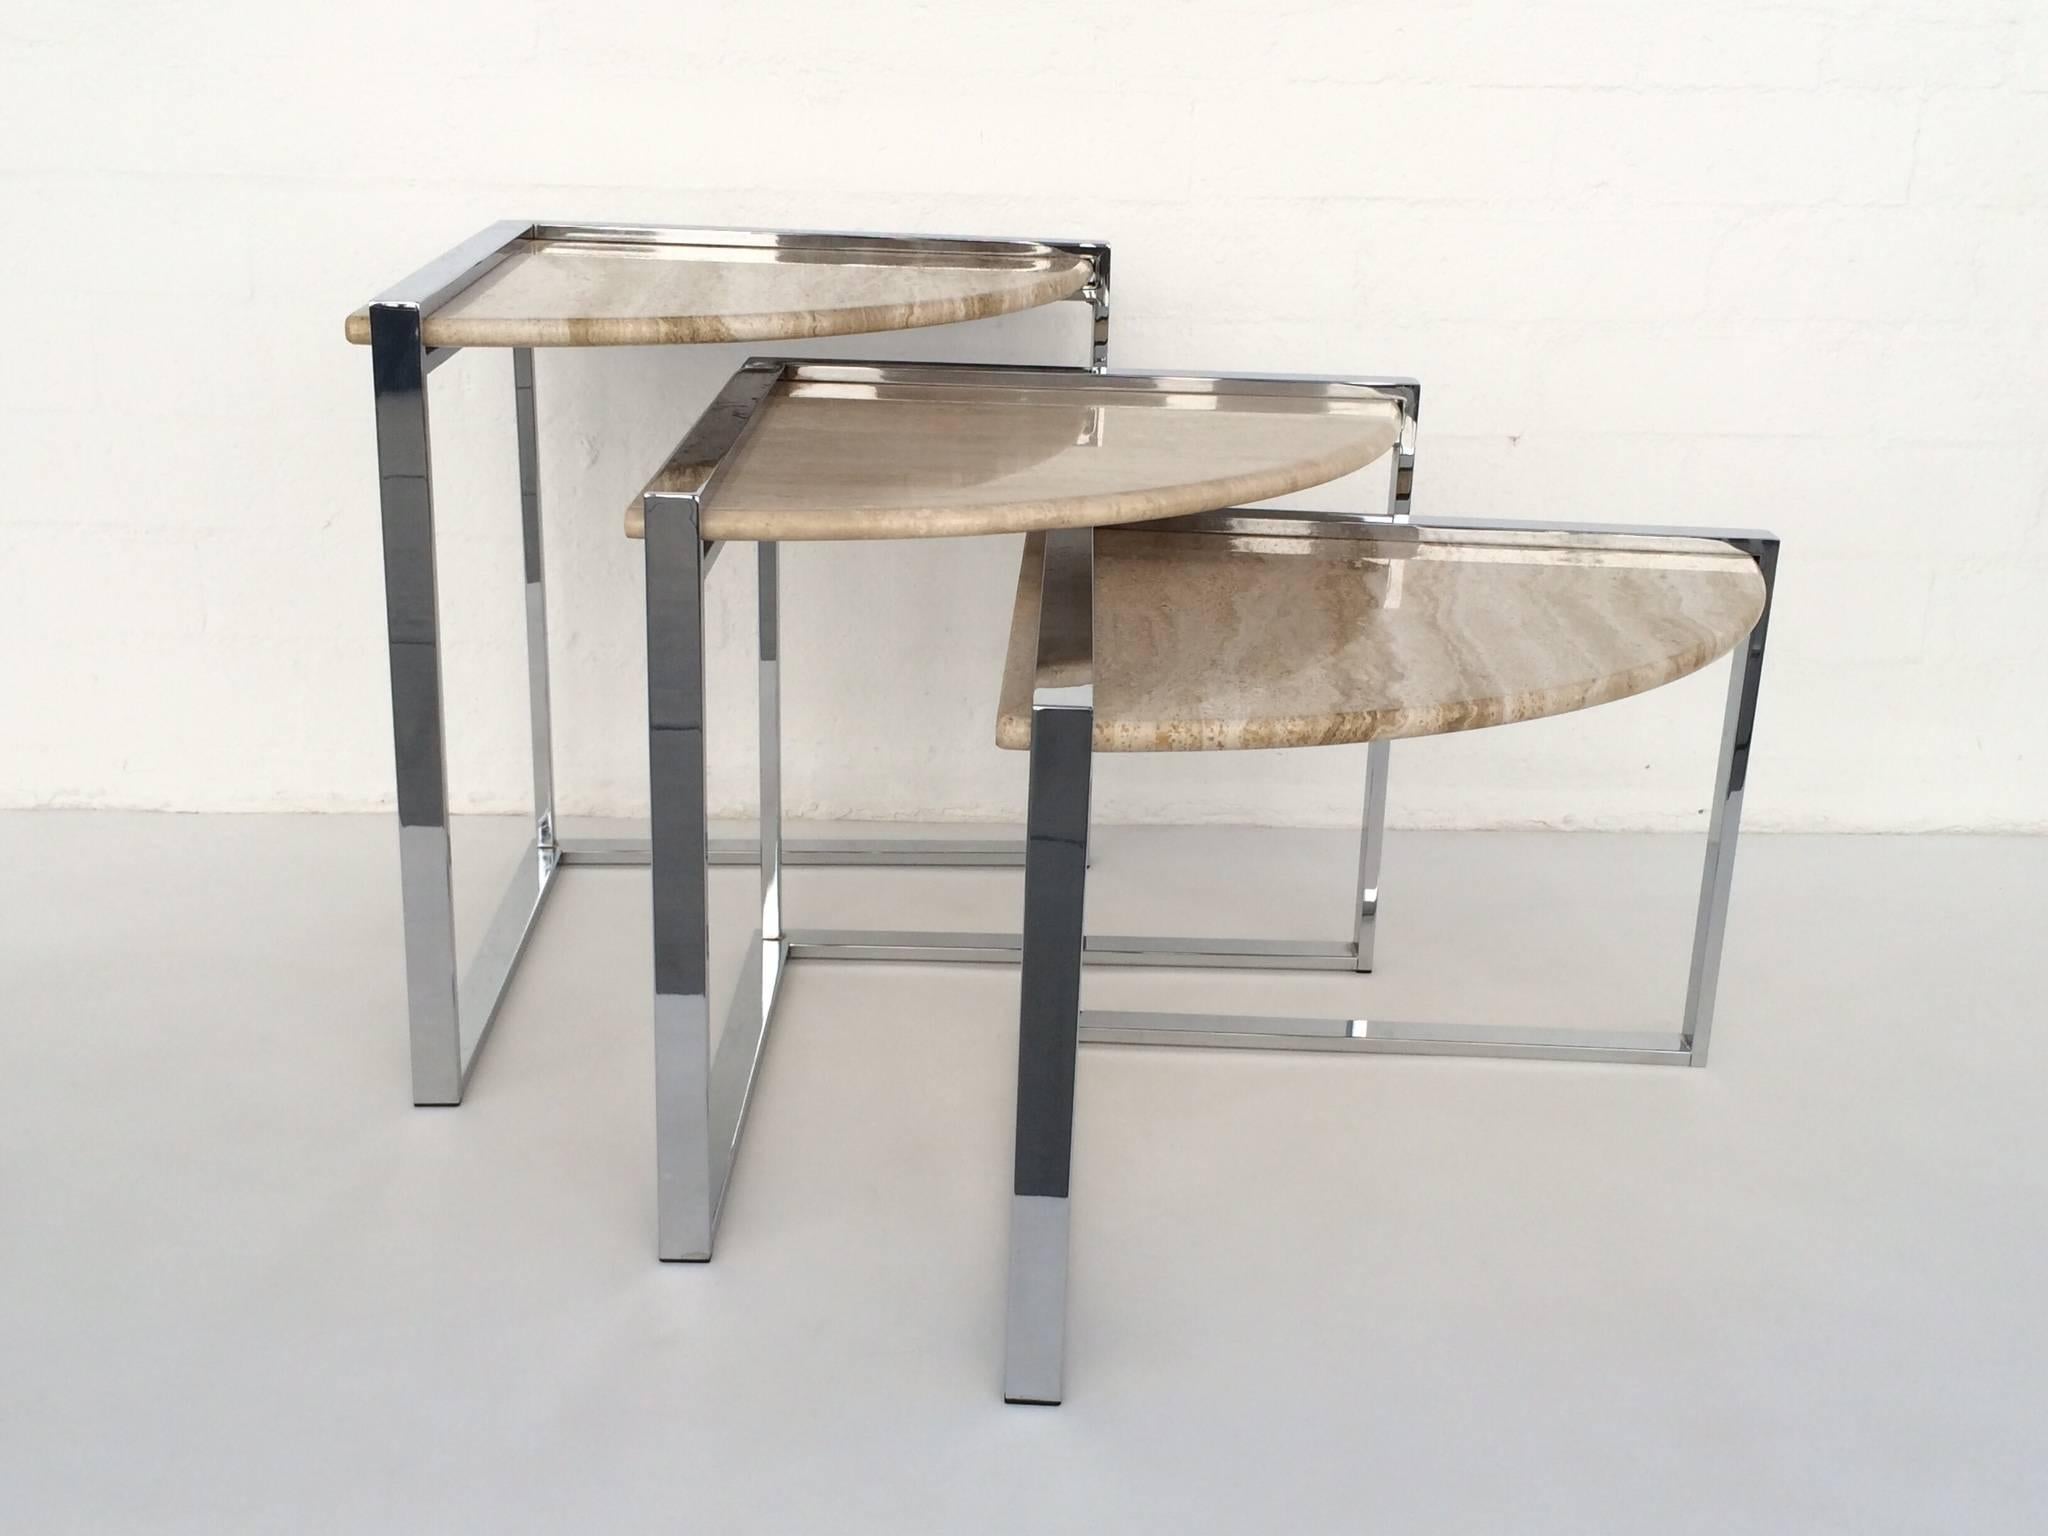  Travertine and Polished Chrome Nesting Tables Designed by Milo Baughman 1